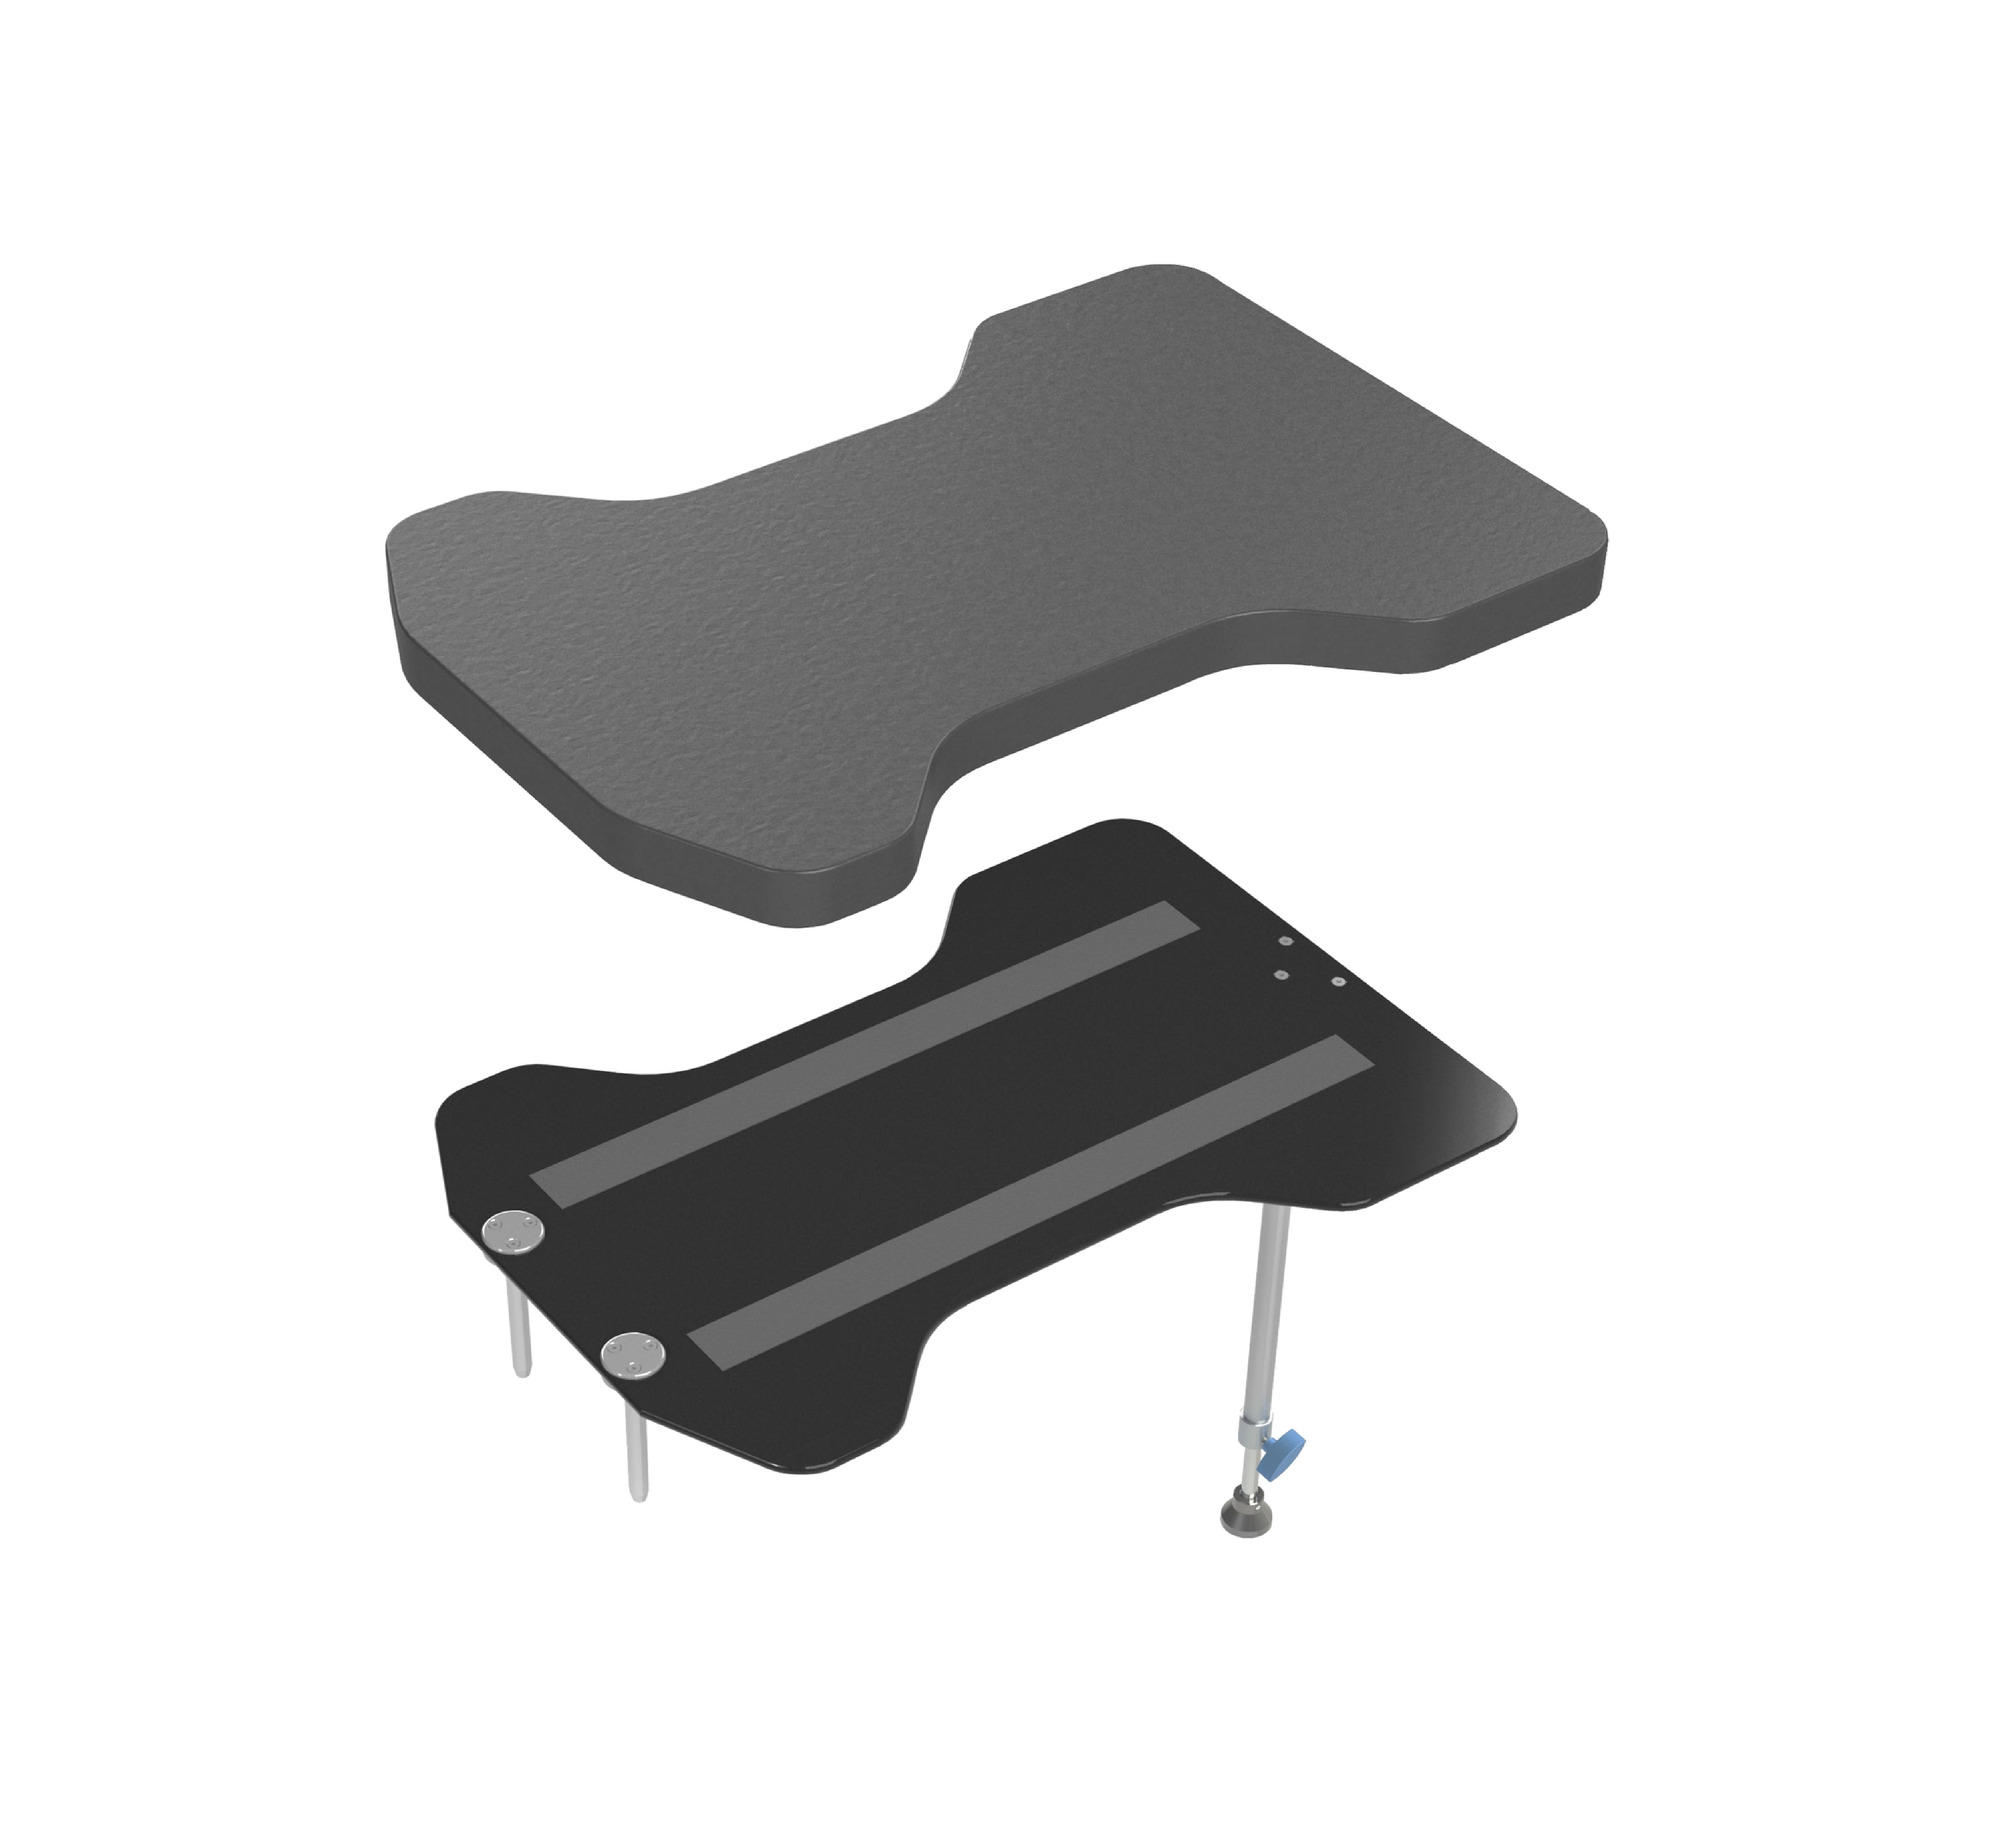 Hourglass Arm Table - Hipac Surgical Product